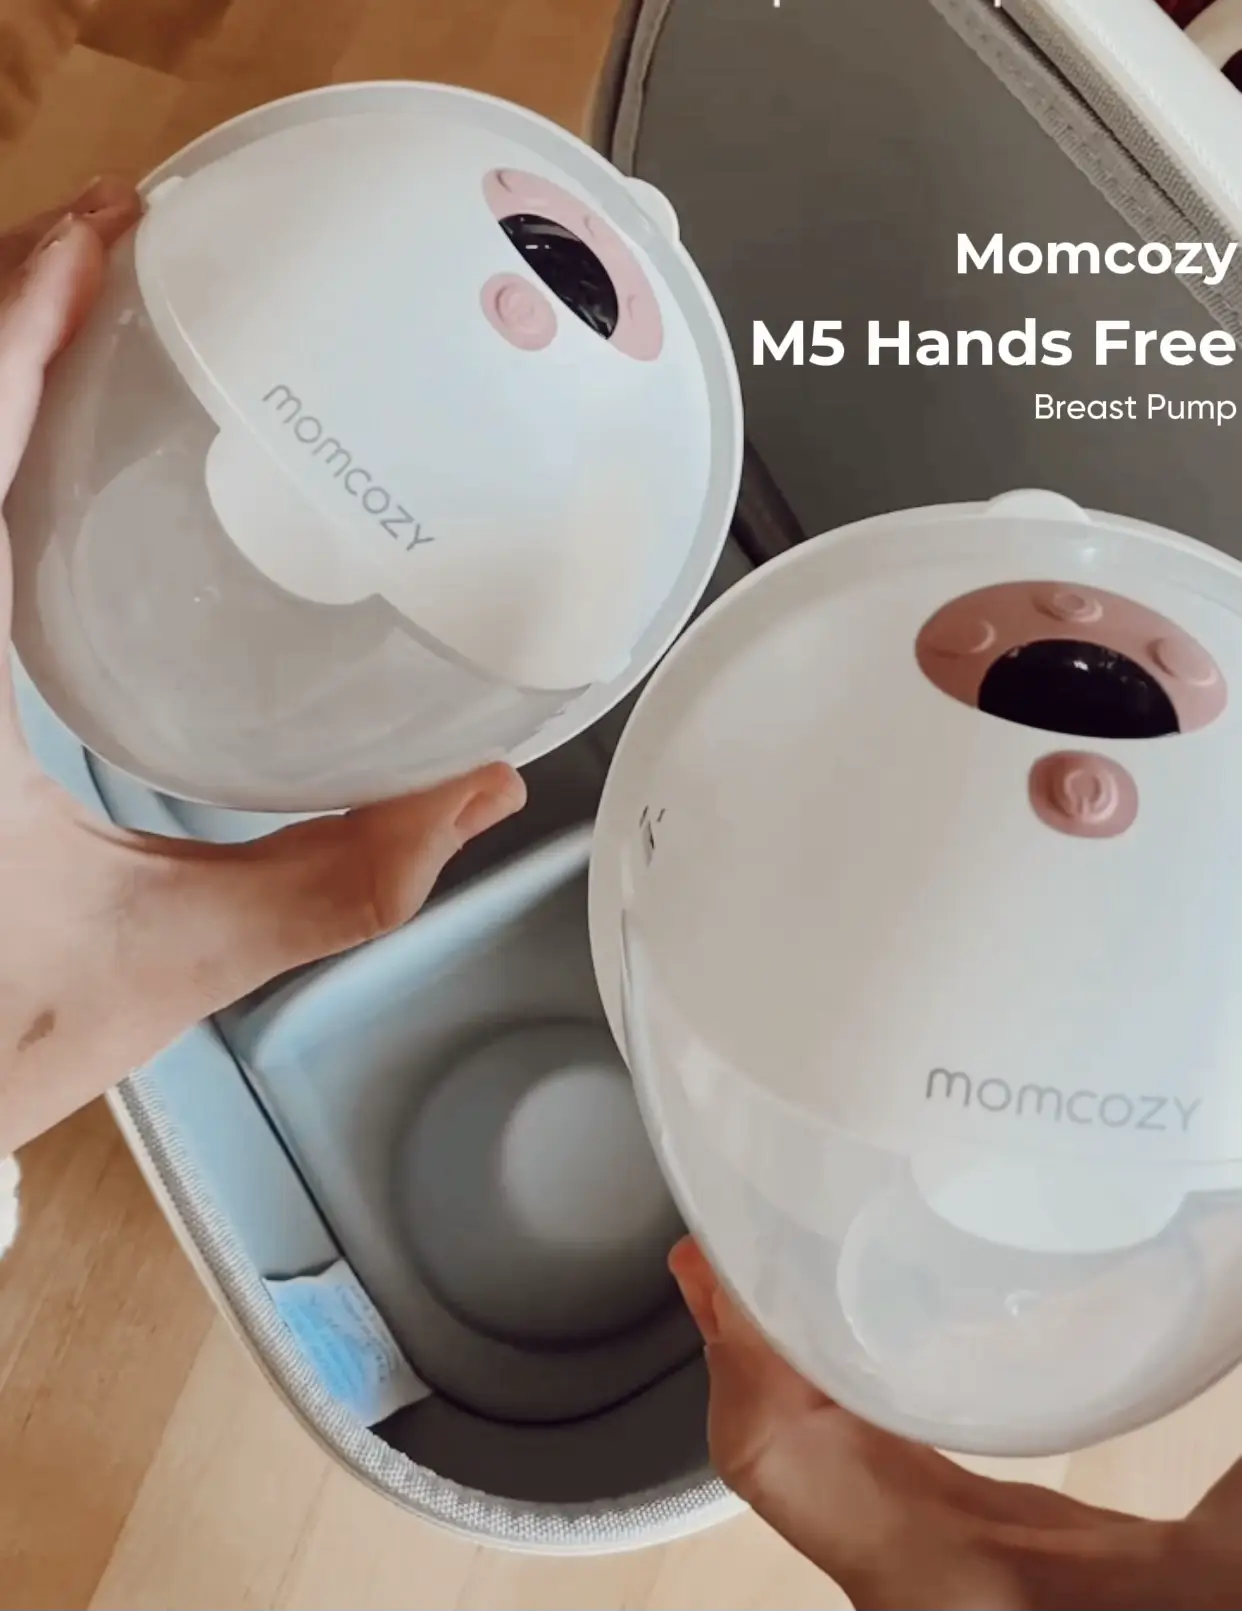 My Favorite Momcozy Products 🤍, Gallery posted by MariaDonley